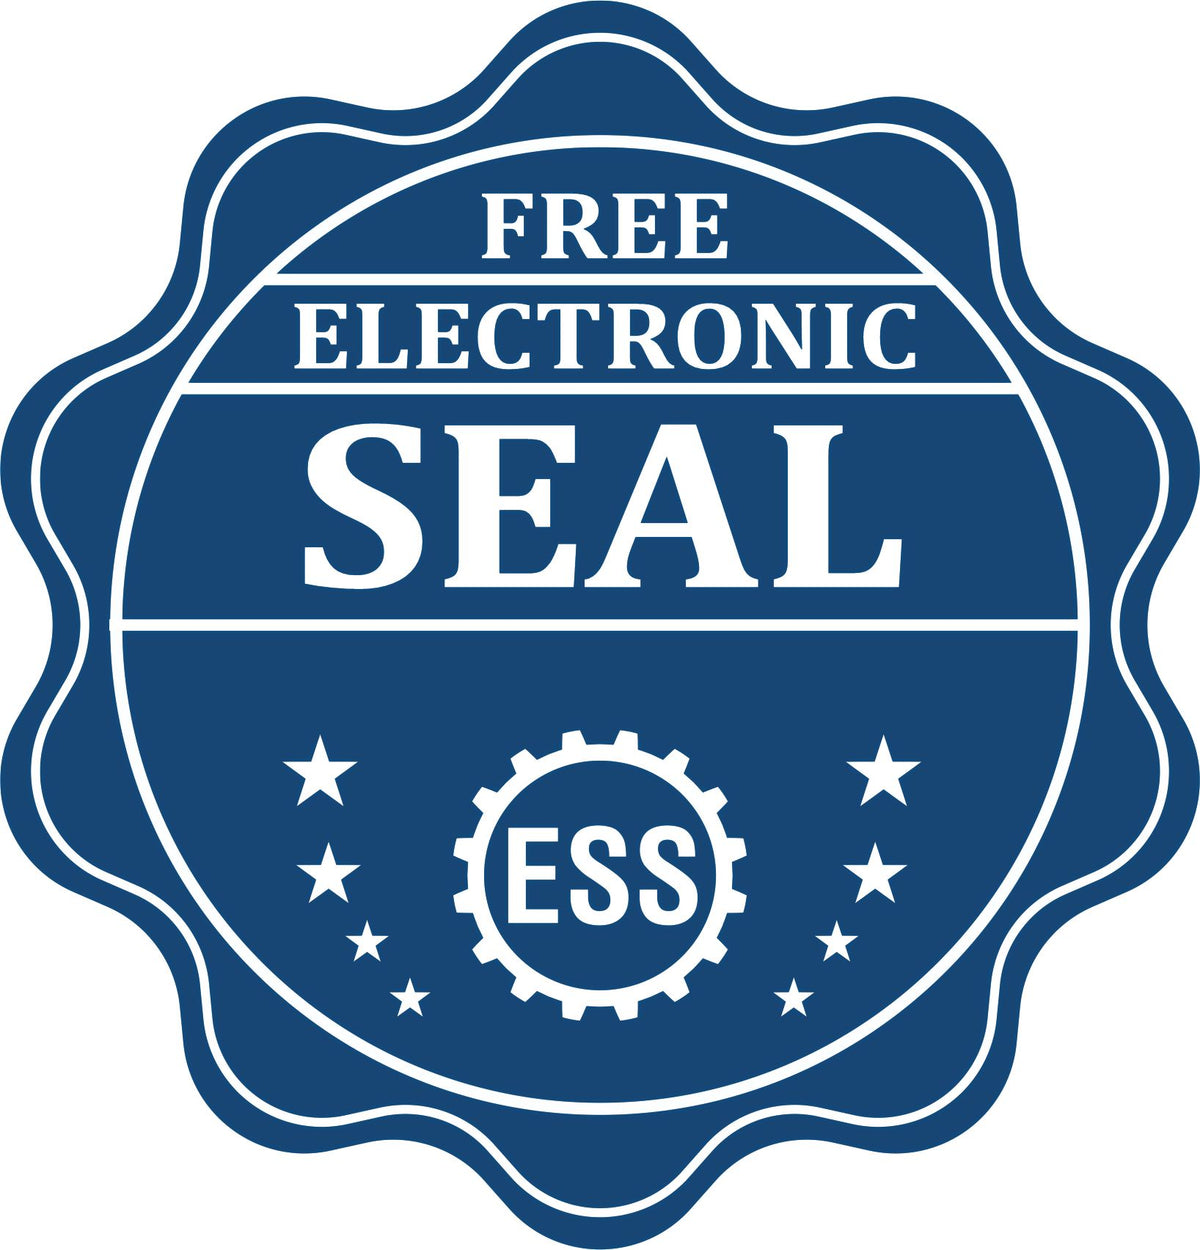 A badge showing a free electronic seal for the Gift Florida Architect Seal with stars and the ESS gear on the emblem.